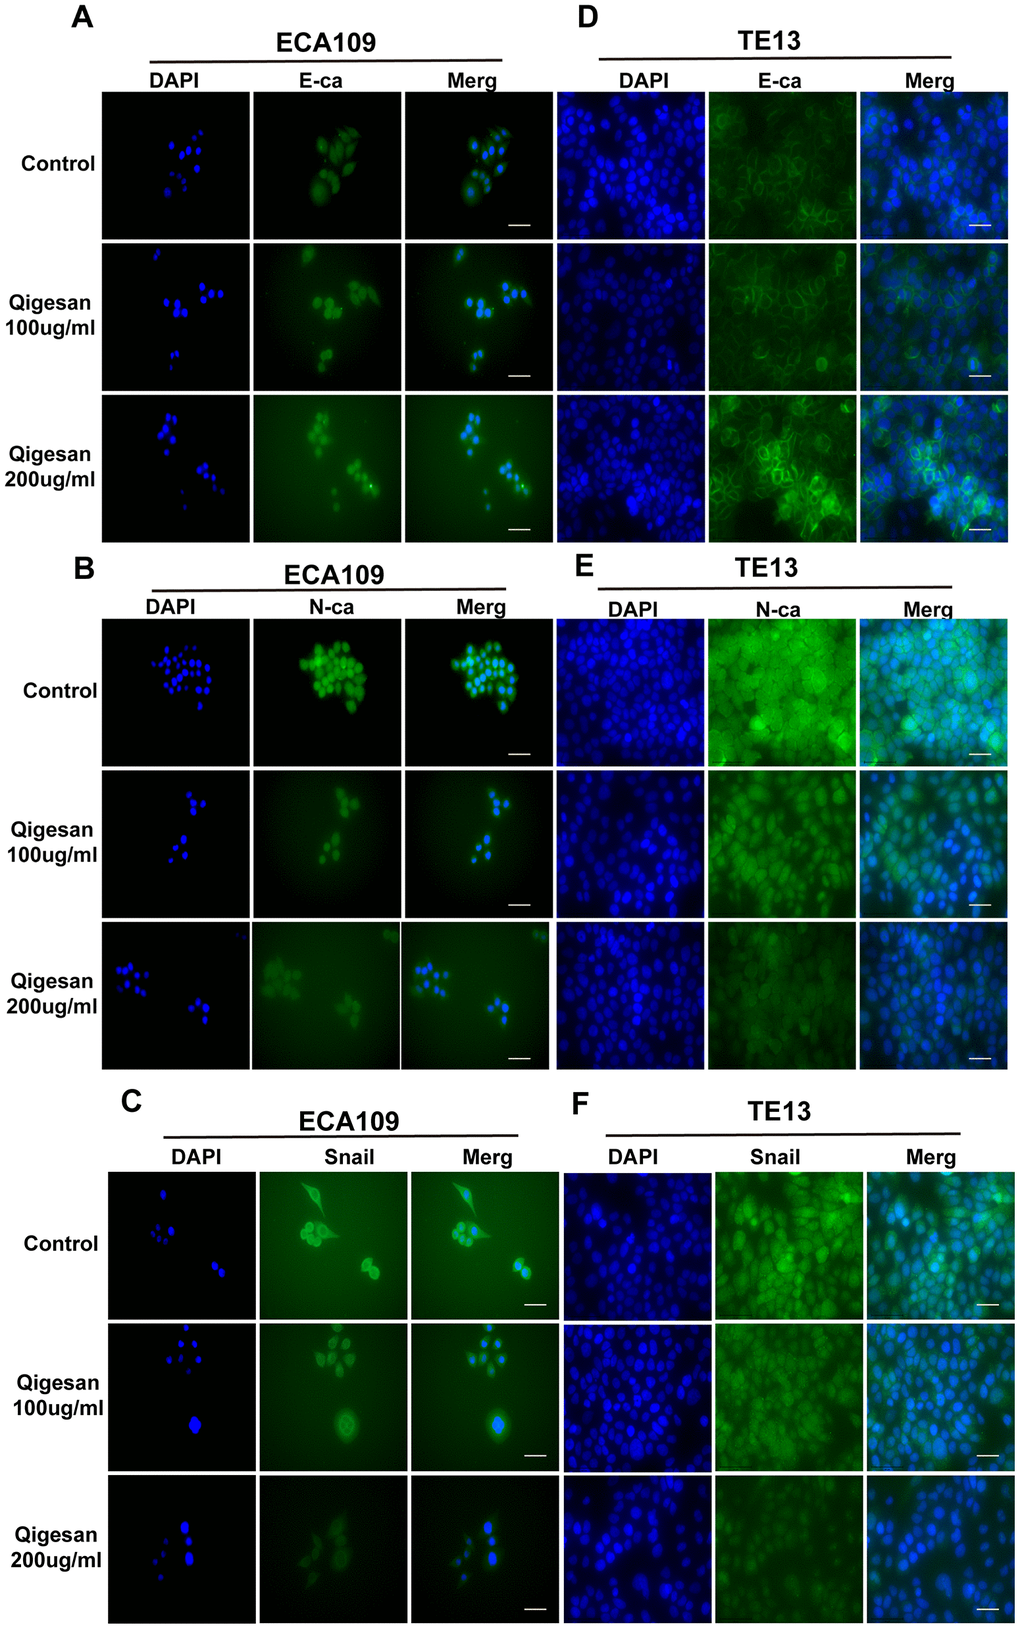 QGS inhibits EMT in esophageal cancer cells. (A–C) Immunofluorescence images showing E-ca, N-ca, and Snail1 localization in ECA109 cells. QSG dose-dependently increased E-ca expression and inhibited N-ca and Snail1 expression. (D–F) Immunofluorescence images of E-ca, N-ca, and Snail1 in TE13 showing the same trend after QSG stimulation. Scale bars indicate 10 μm.